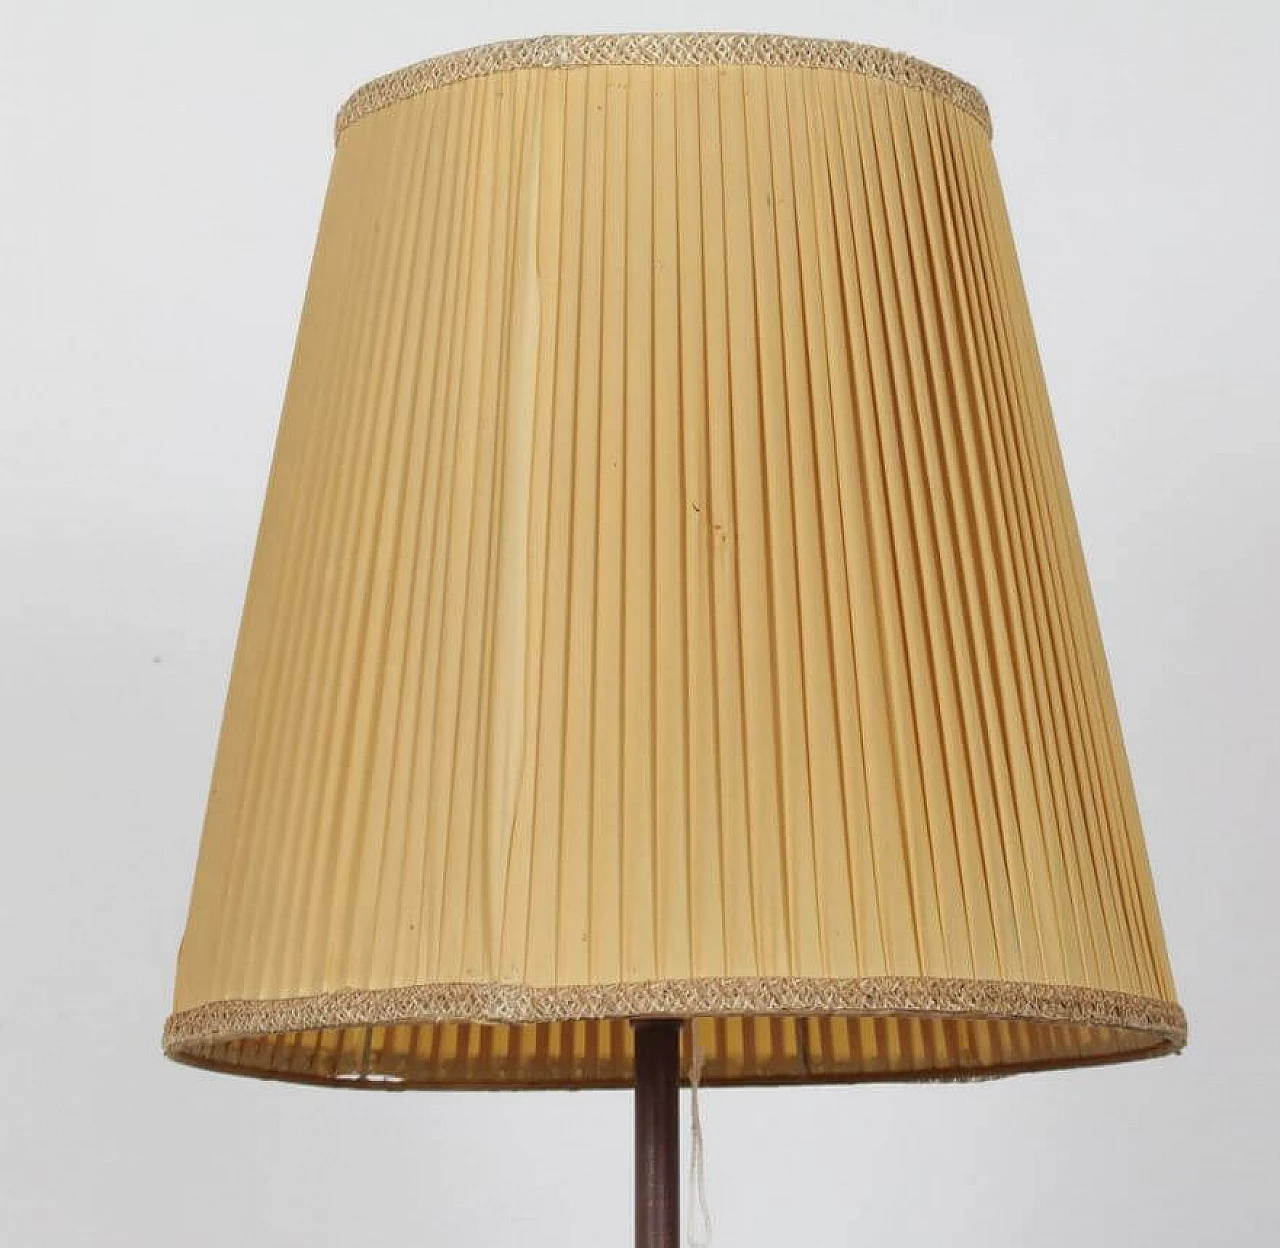 Floor lamp with fabric shade, 1940s 1370887